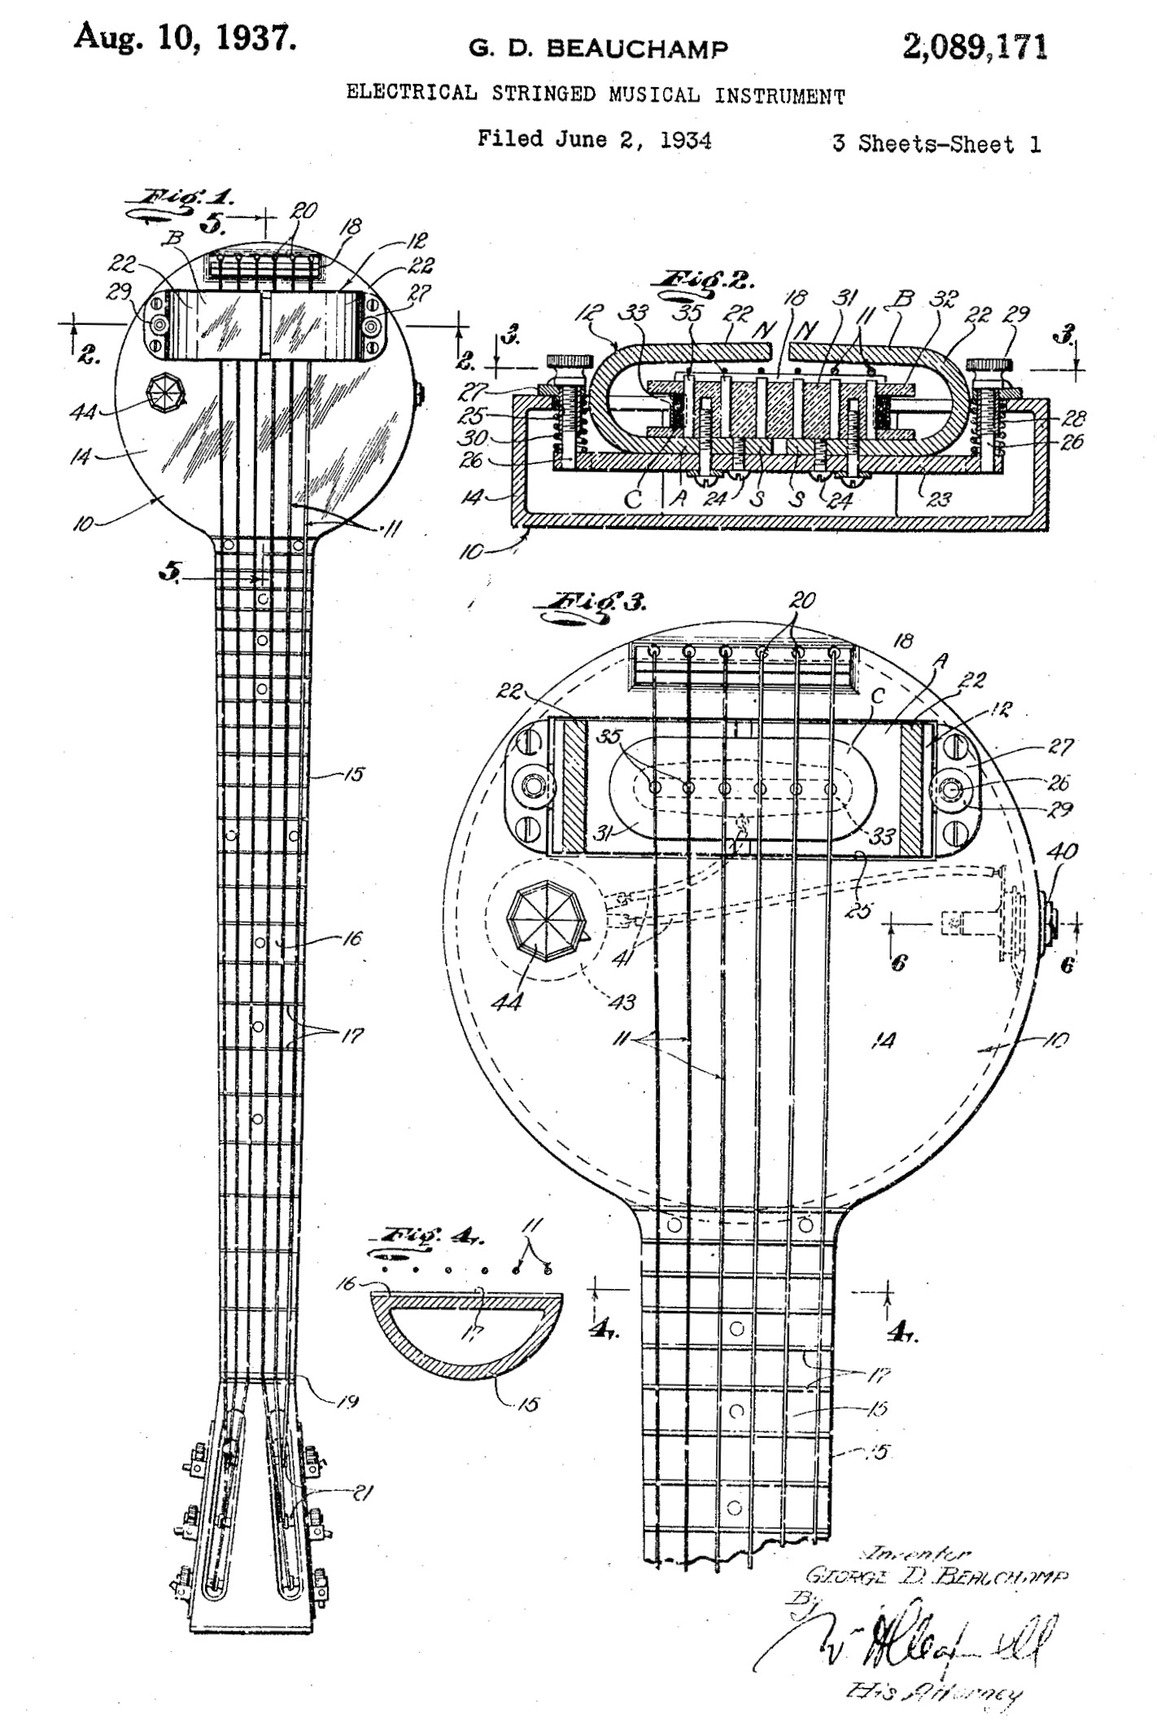 Patent drawing for the first commercially produced electric guitar, the Ro-Pat-In “Frying Pan”